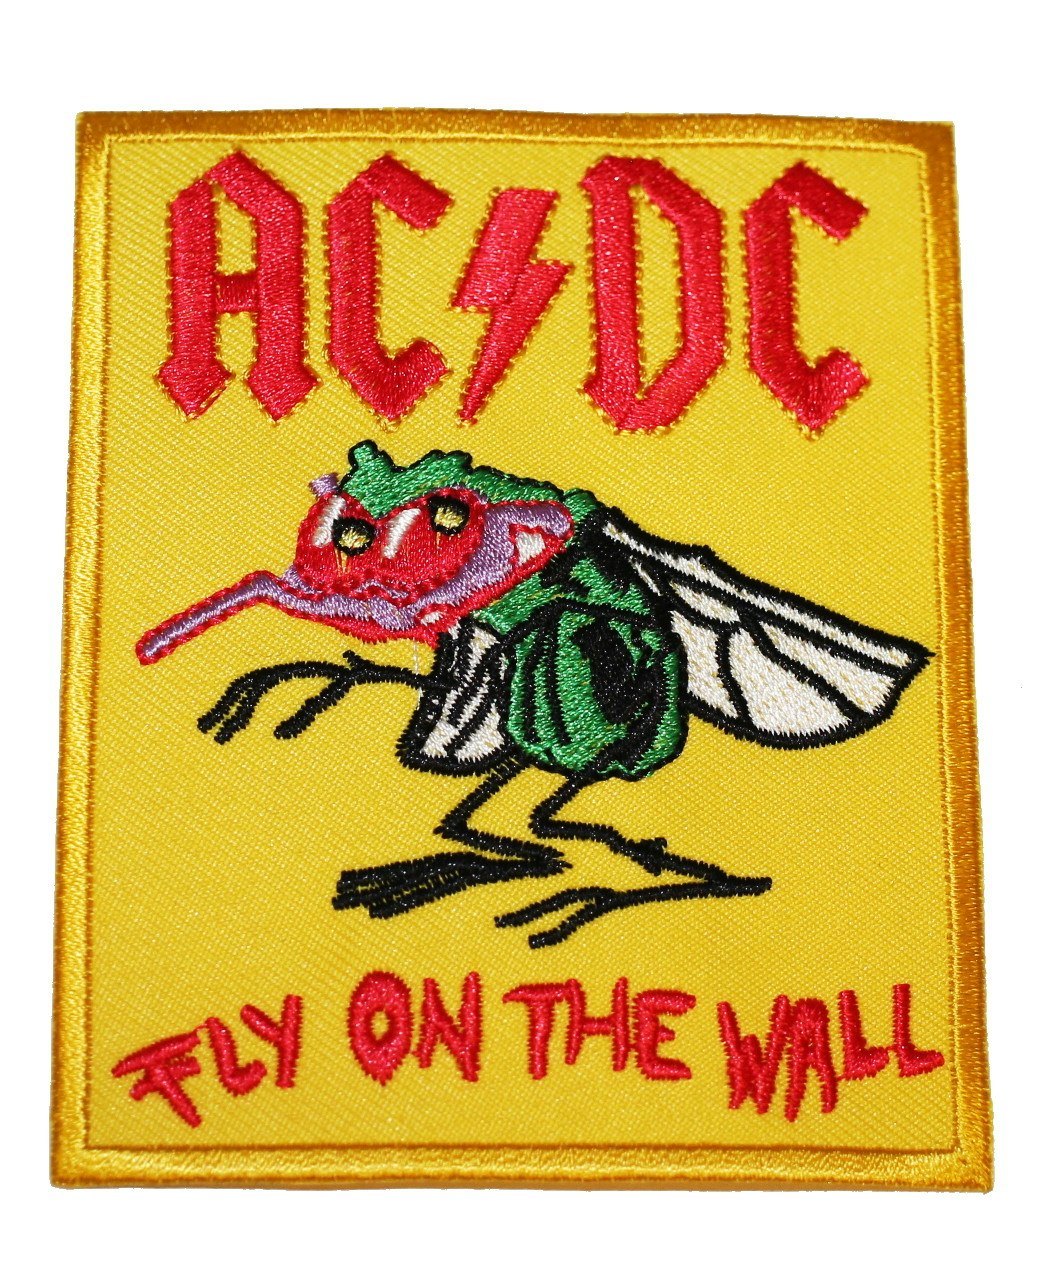 Ac/dc fly on the wall logo patch